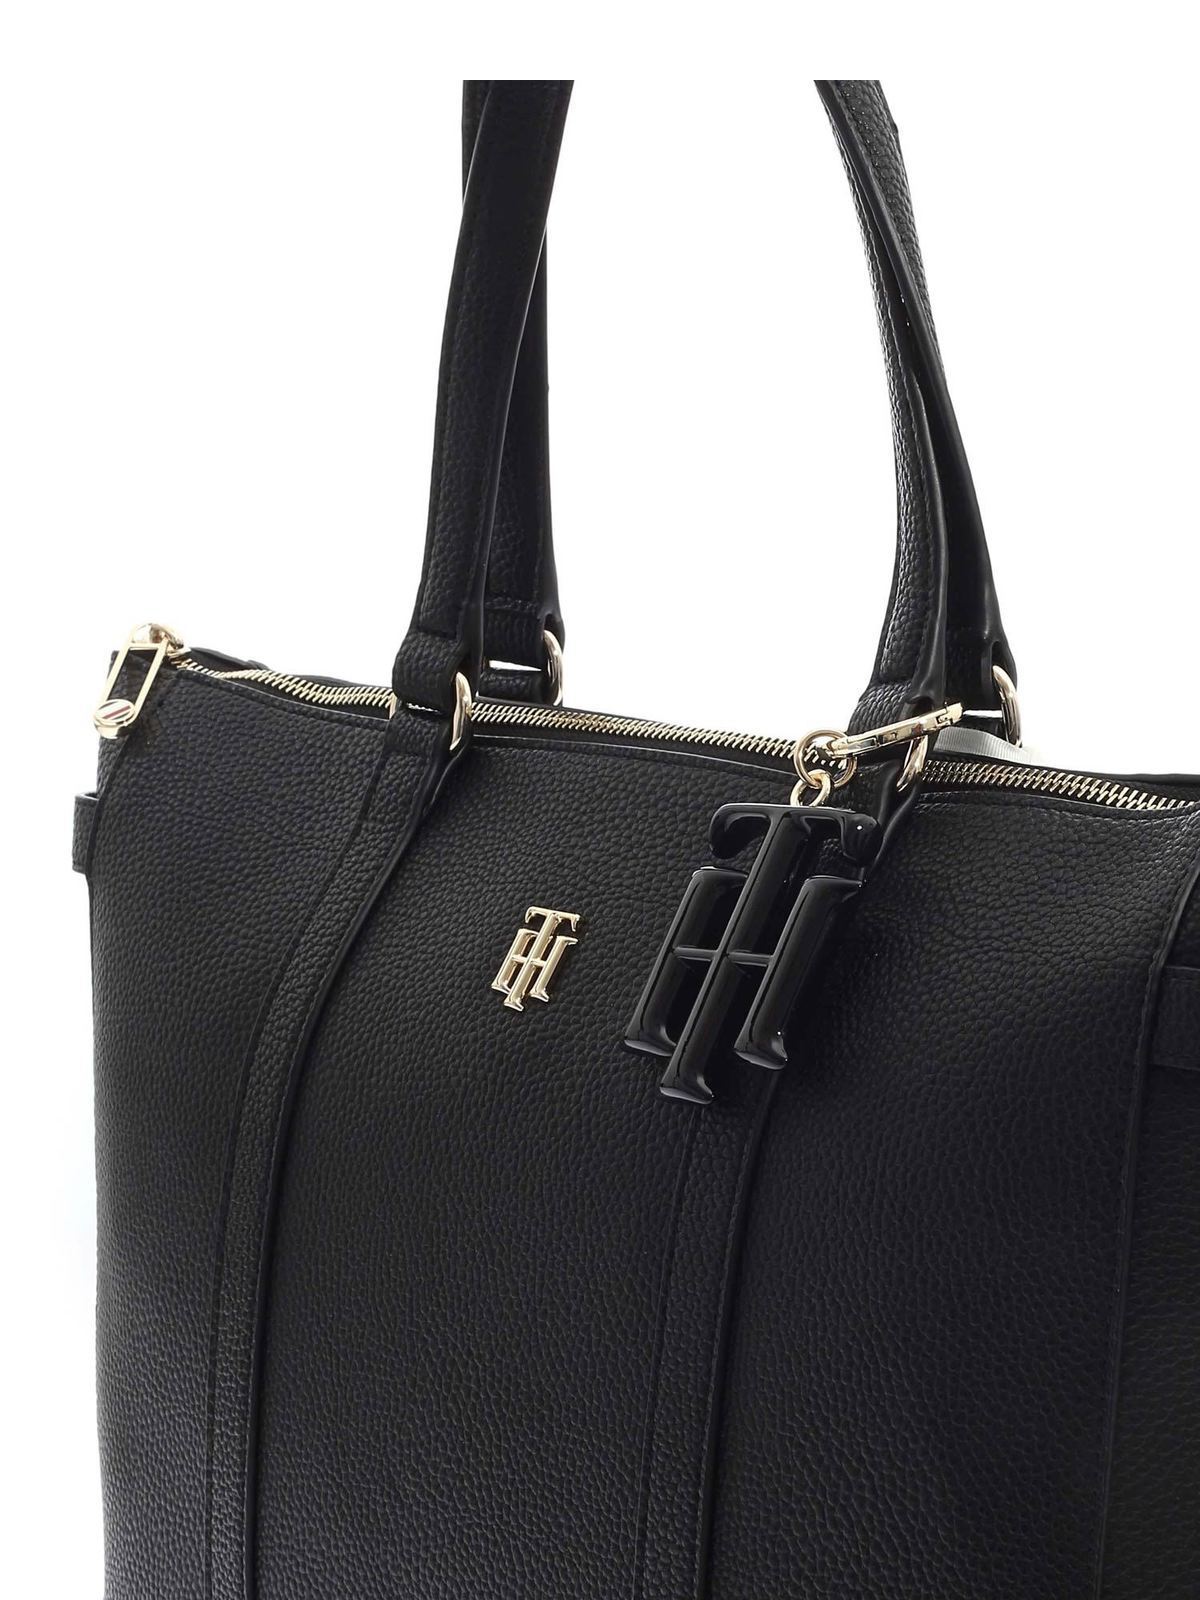 foran Soar Donau Totes bags Tommy Hilfiger - Th Soft Tote shopping bag in black -  AW0AW09905BDS